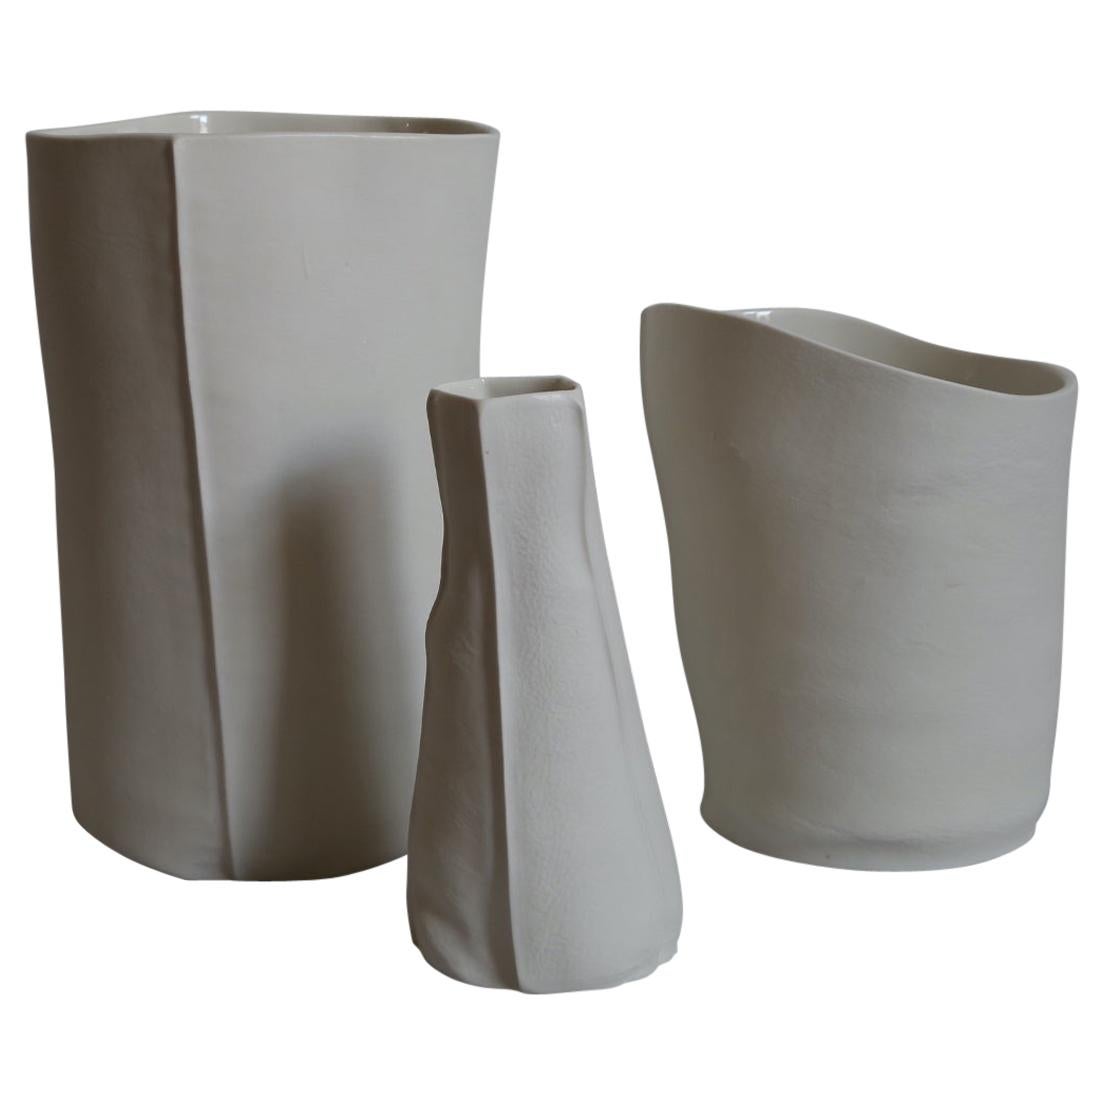 Set of Three Unique Kawa Vases and Vessels, Porcelain, Ceramic, in Stock